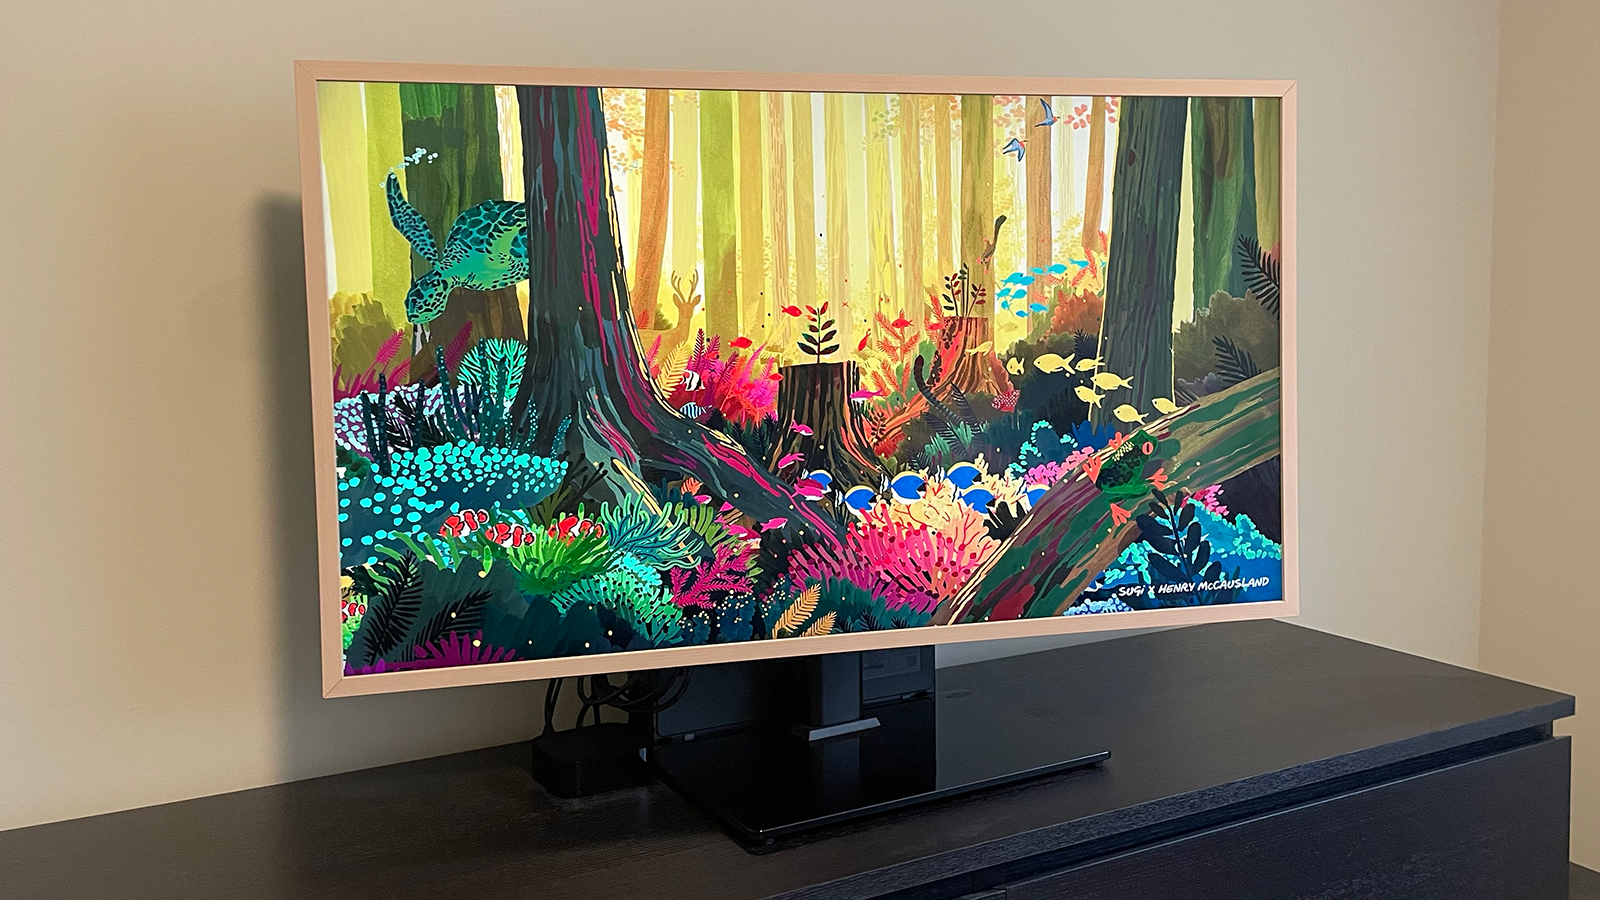 Samsung The Frame Tv 2021 Review, Can The Samsung Frame Tv Be A Mirror